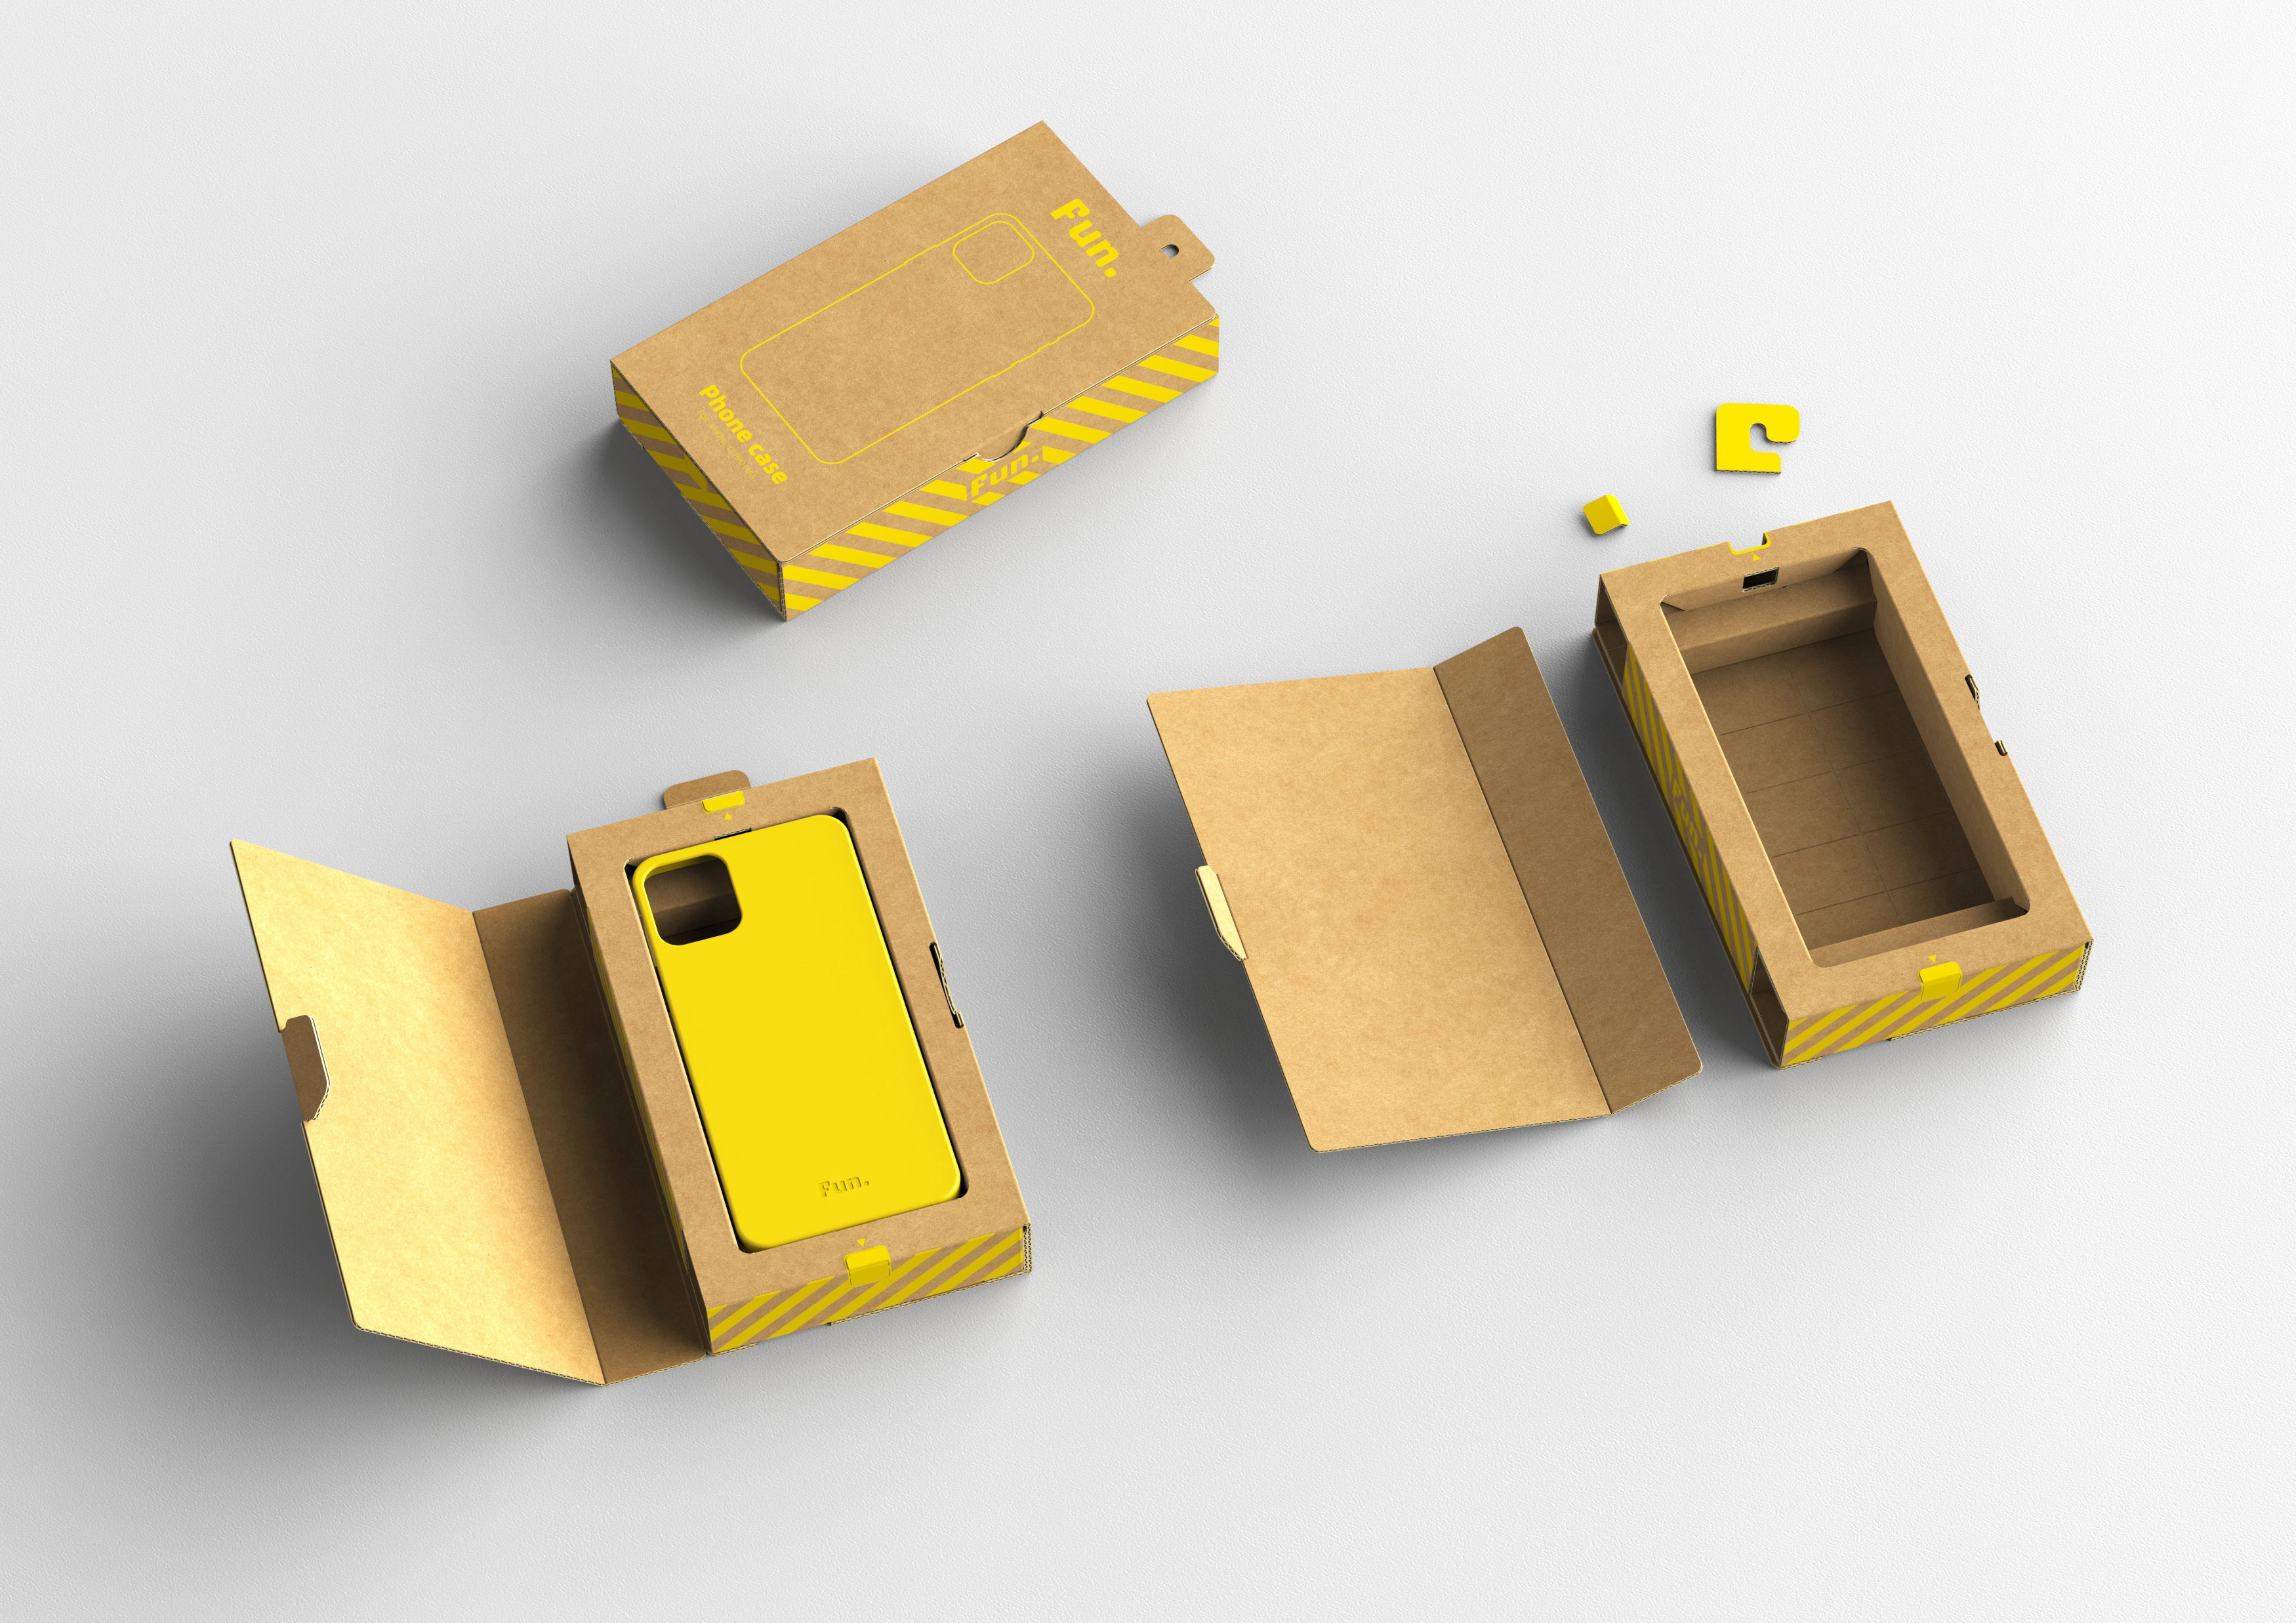 Mobile Gamer Cellphone Packaging Project